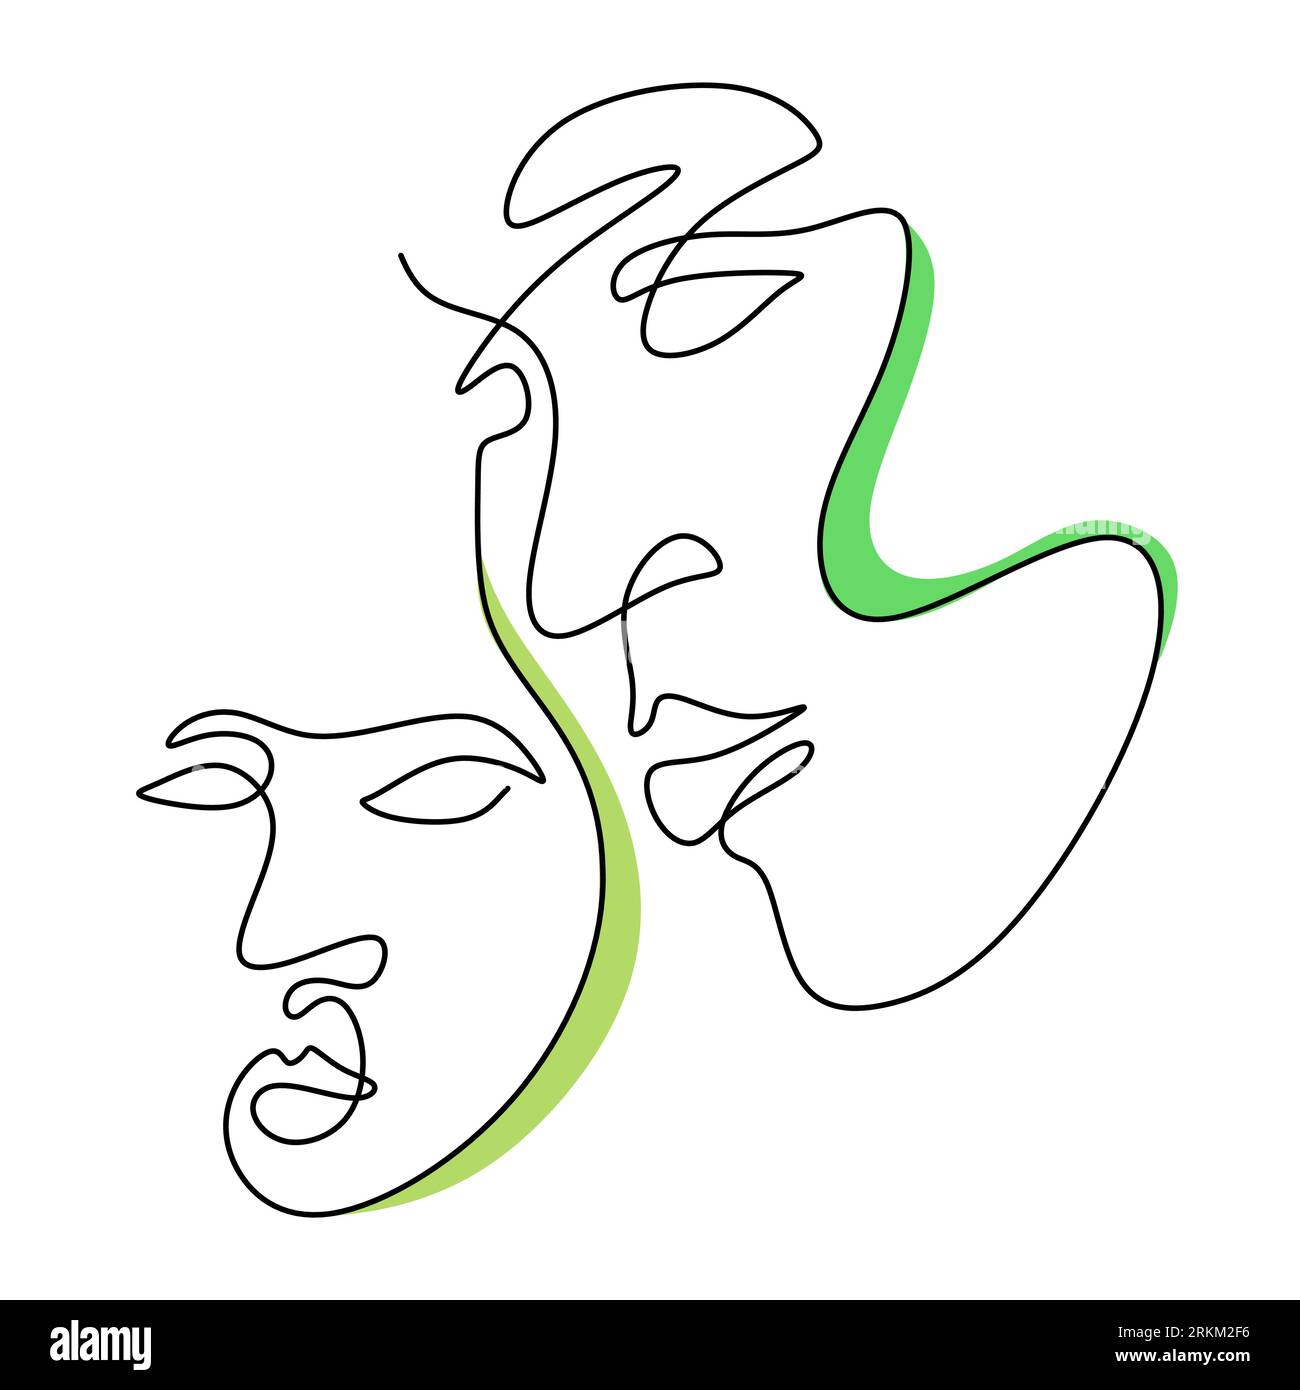 Abstract man and woman one continuous line vector drawing. surreal hand drawn sketch minimalism vector illustration. Stock Vector